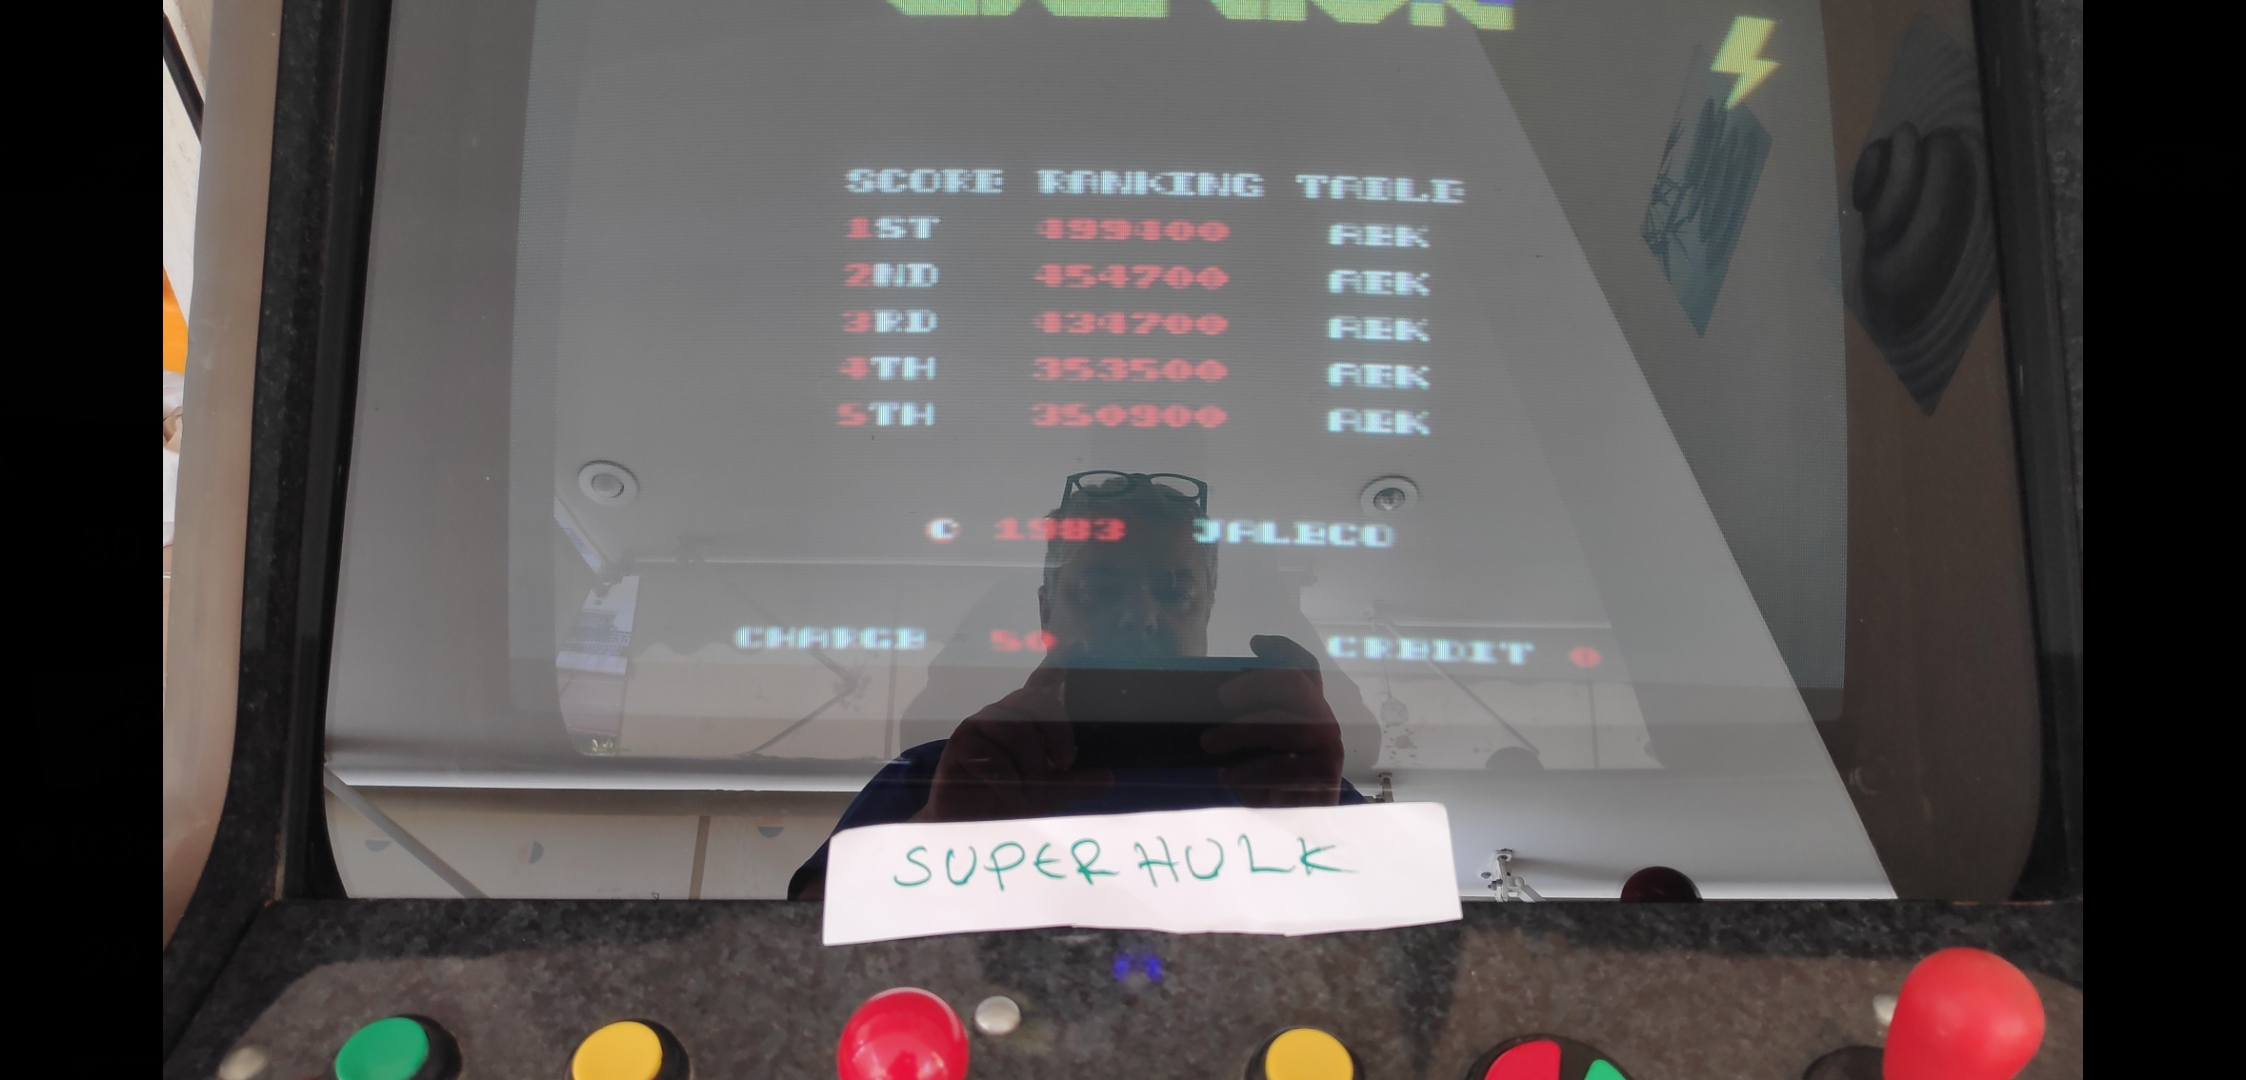 superhulk: Exerion (Arcade Emulated / M.A.M.E.) 499,400 points on 2022-06-17 10:12:45